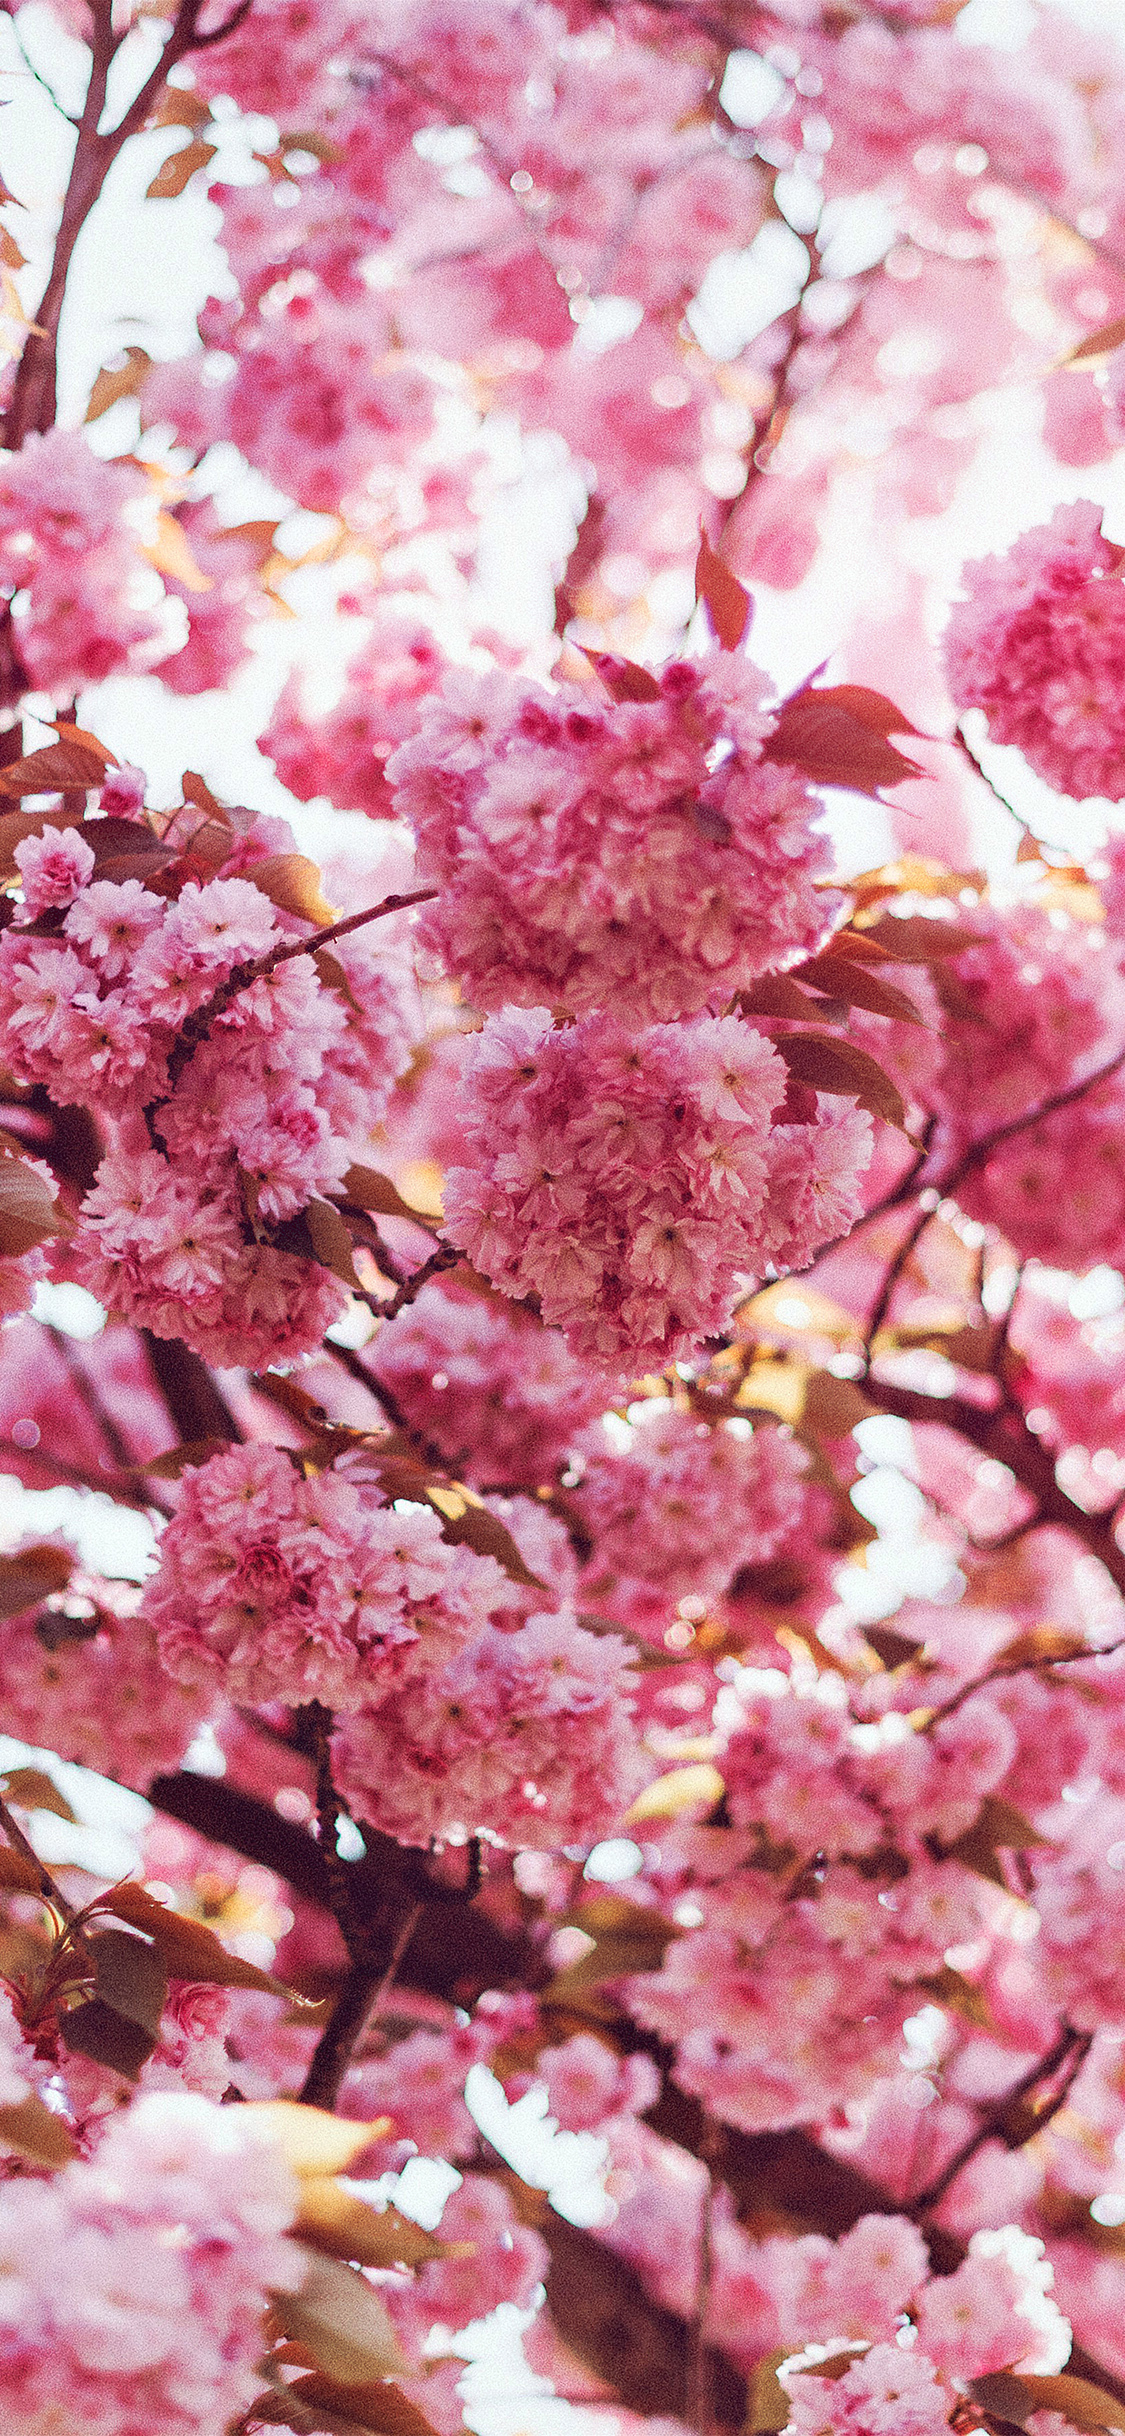 iPhone X wallpaper. spring flower pink blossom bokeh nature flare